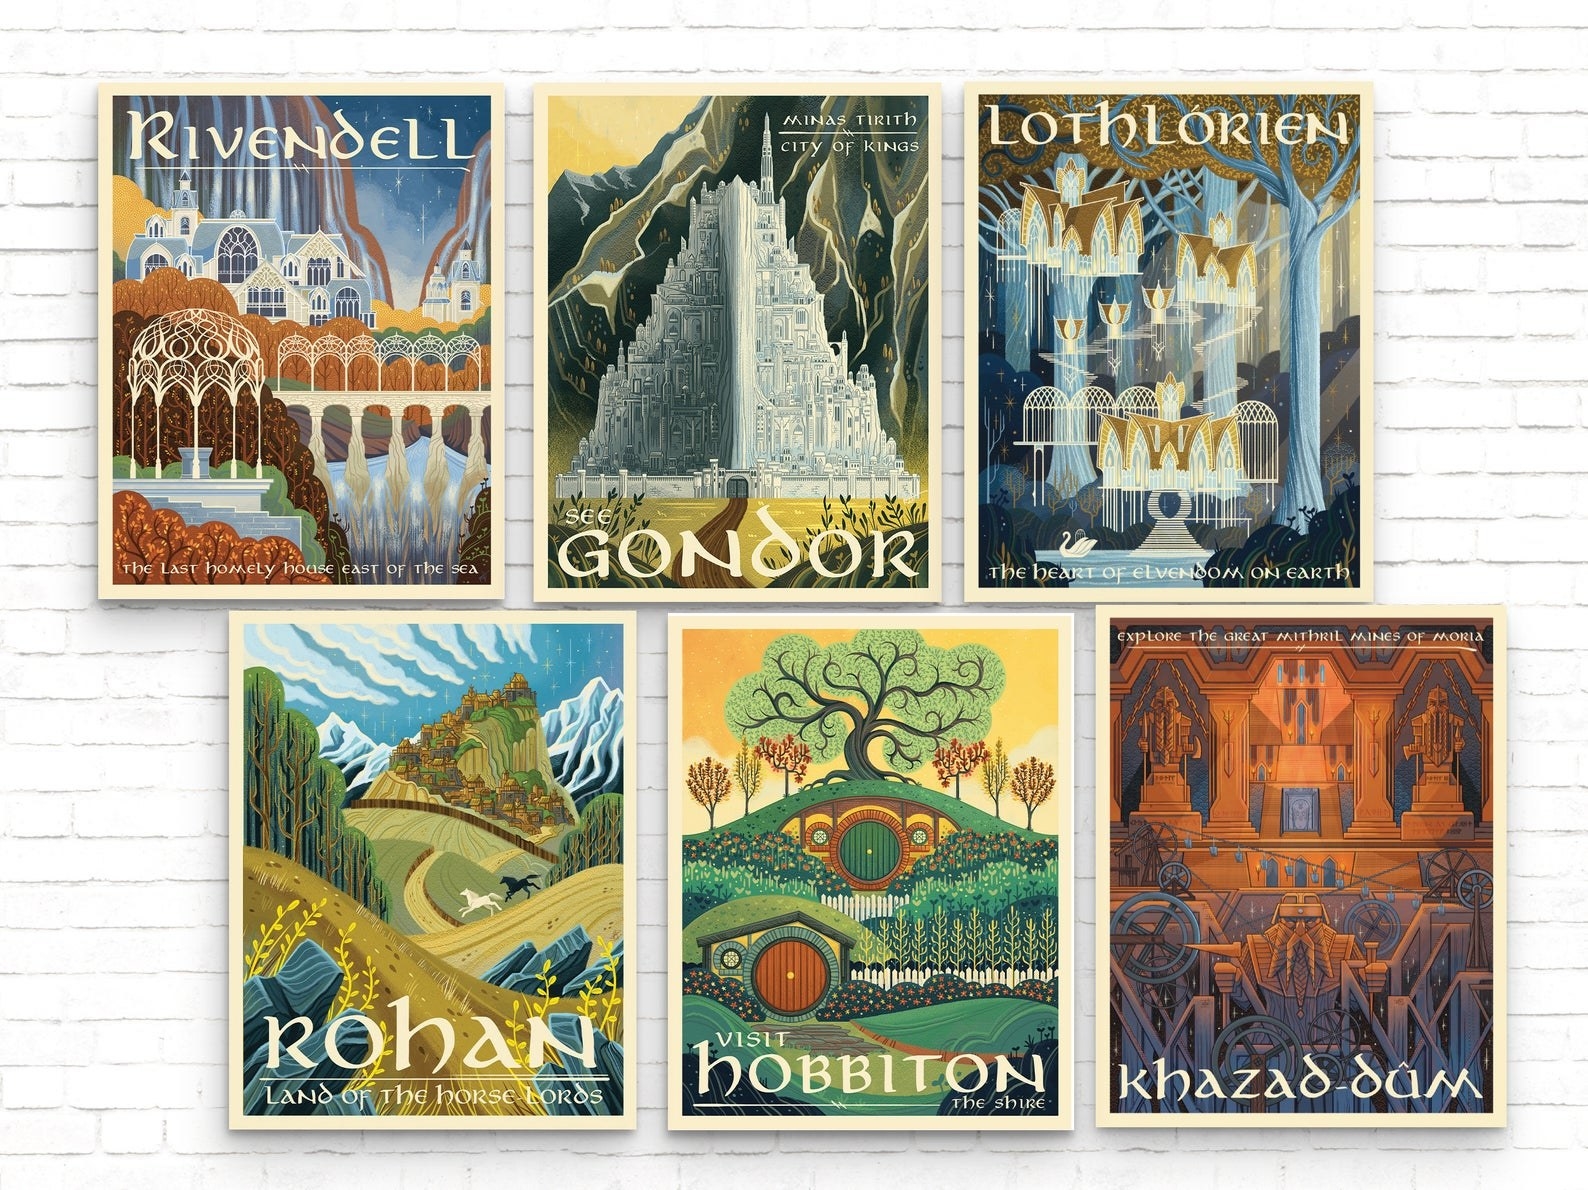 The illustrated post cards